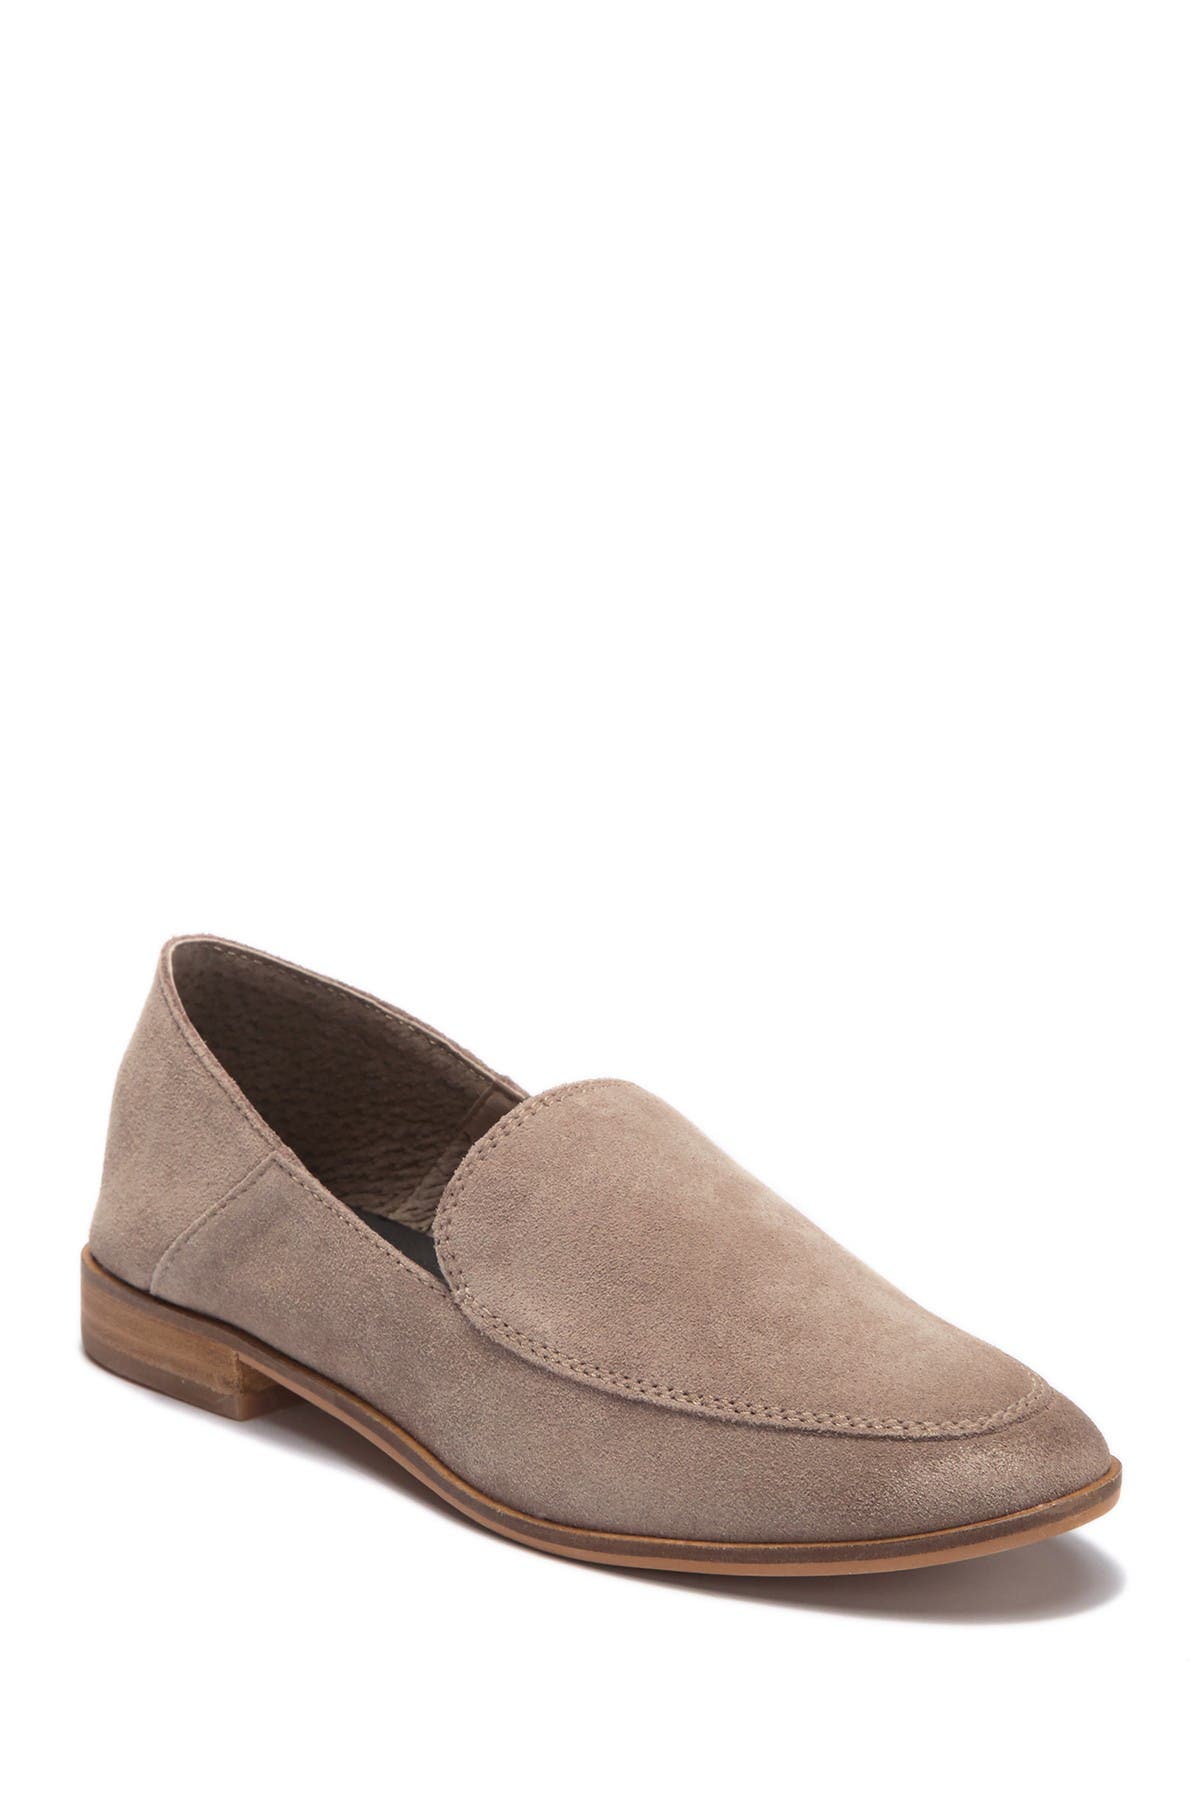 dolce vita suede shoes